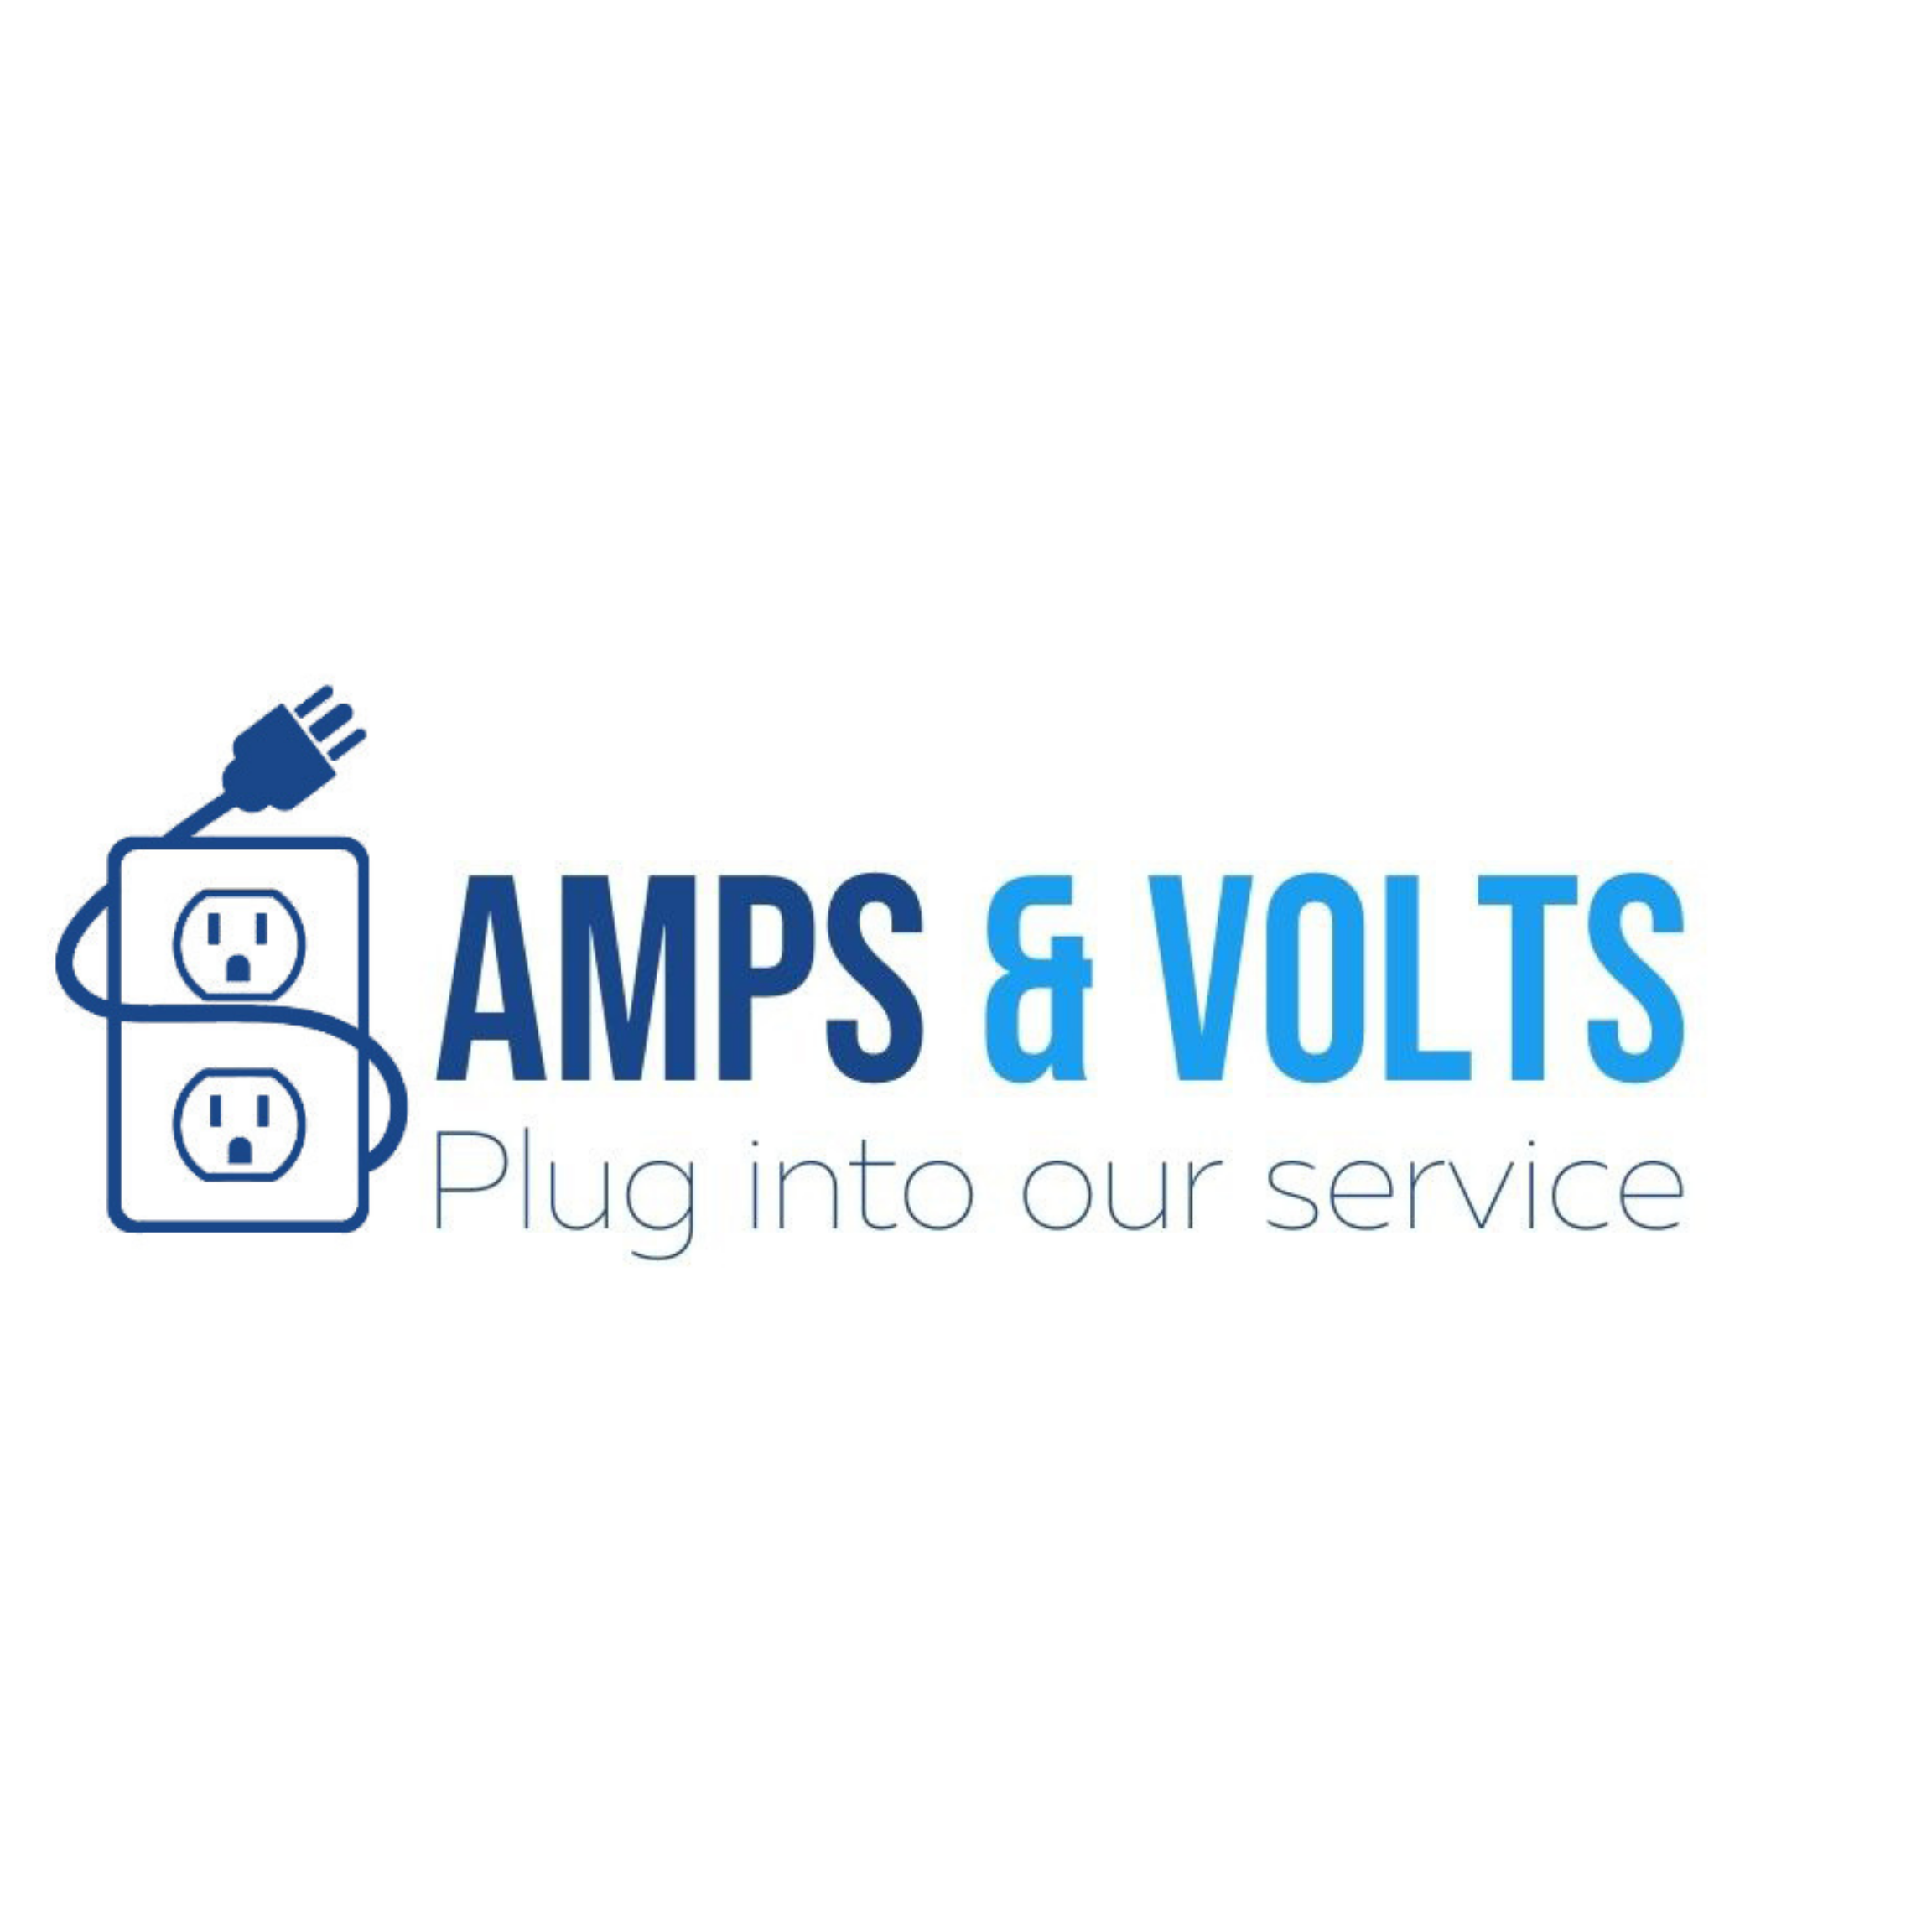 Amps & Volts Electric - Valparaiso, IN 46385 - (219)754-5380 | ShowMeLocal.com